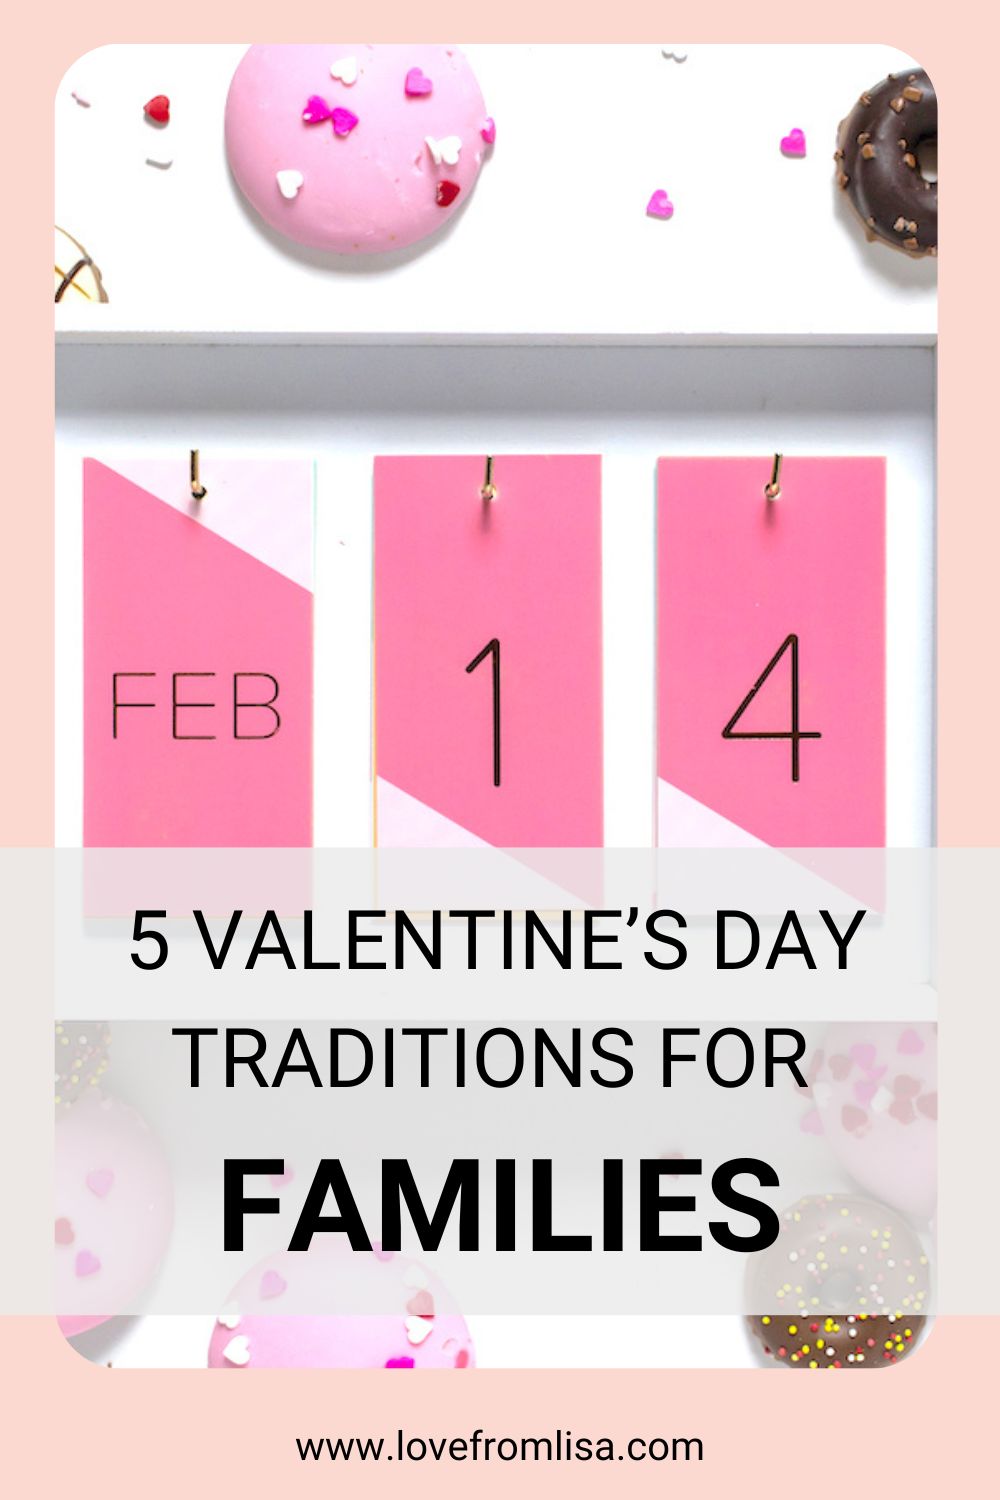 5 Valentine’s Day traditions for families Pinterest graphic